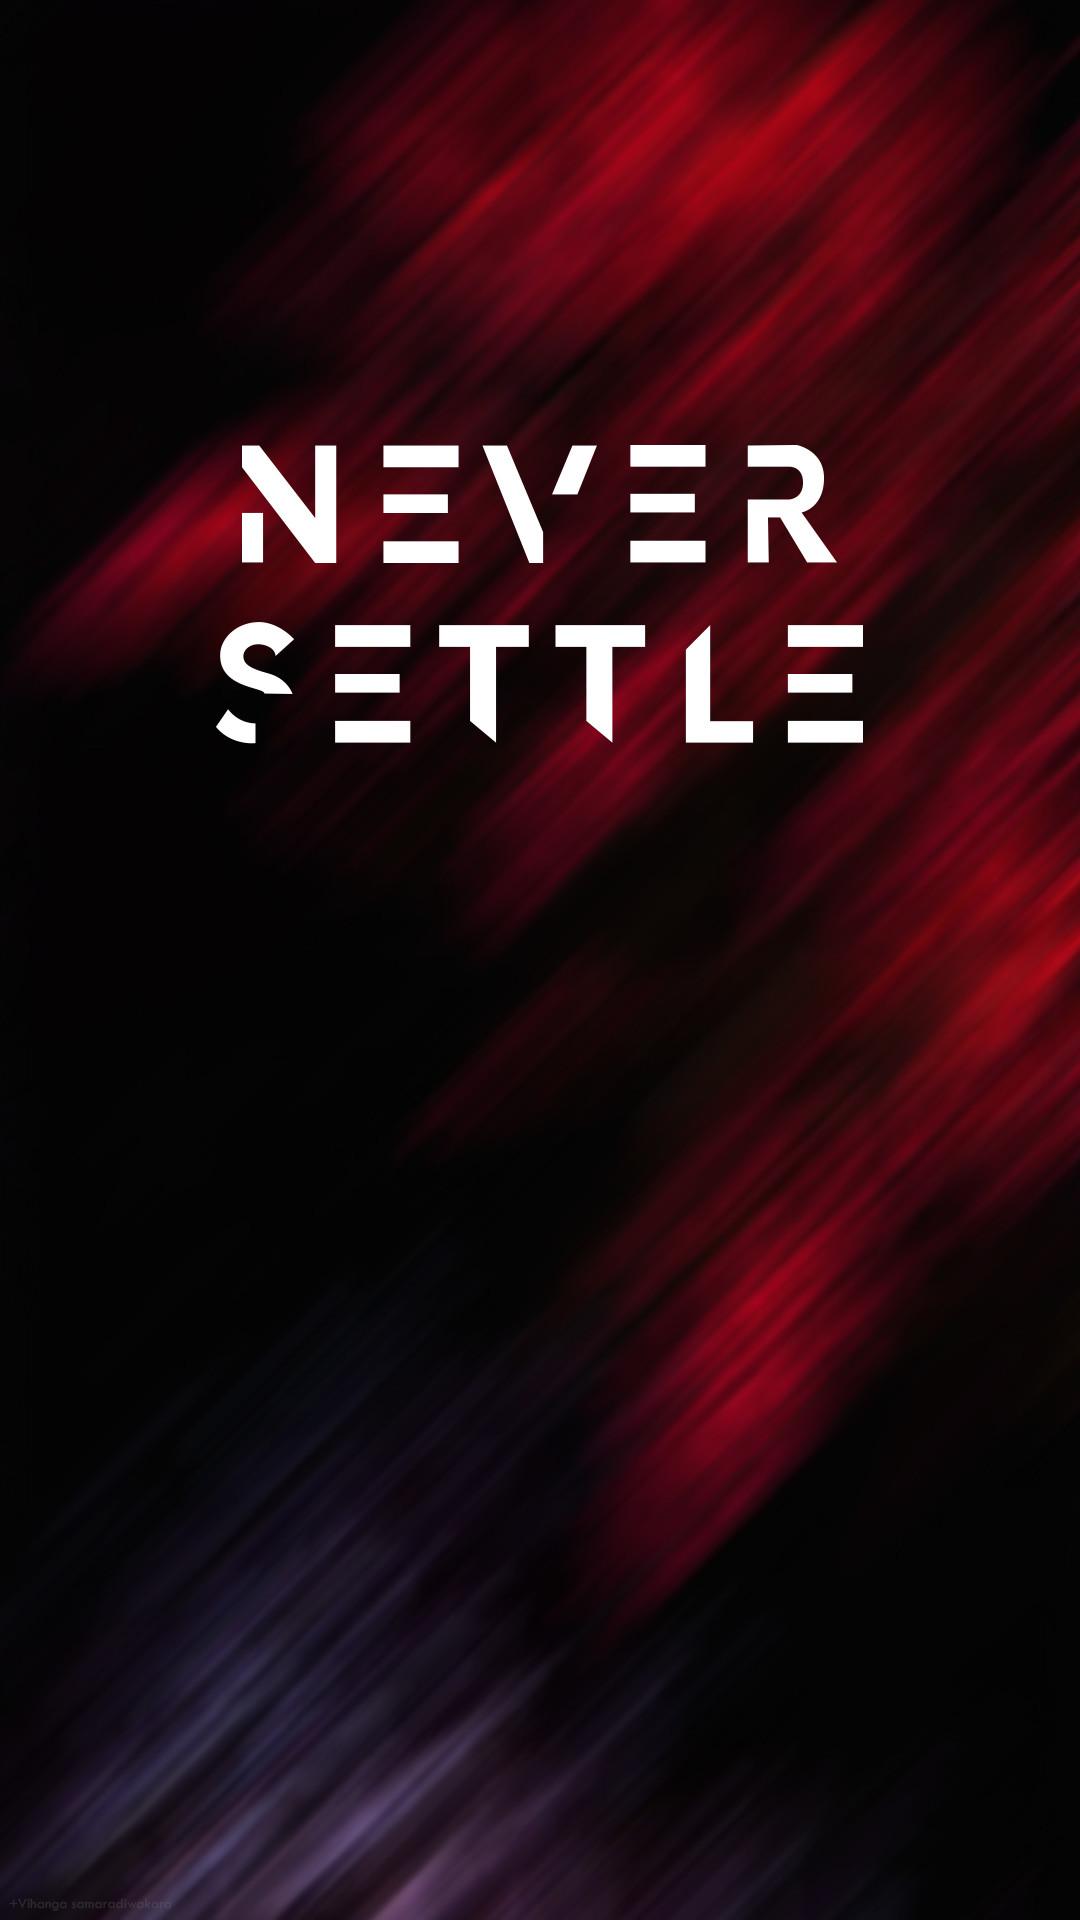 Oneplus Mobile Hd Wallpaper Download